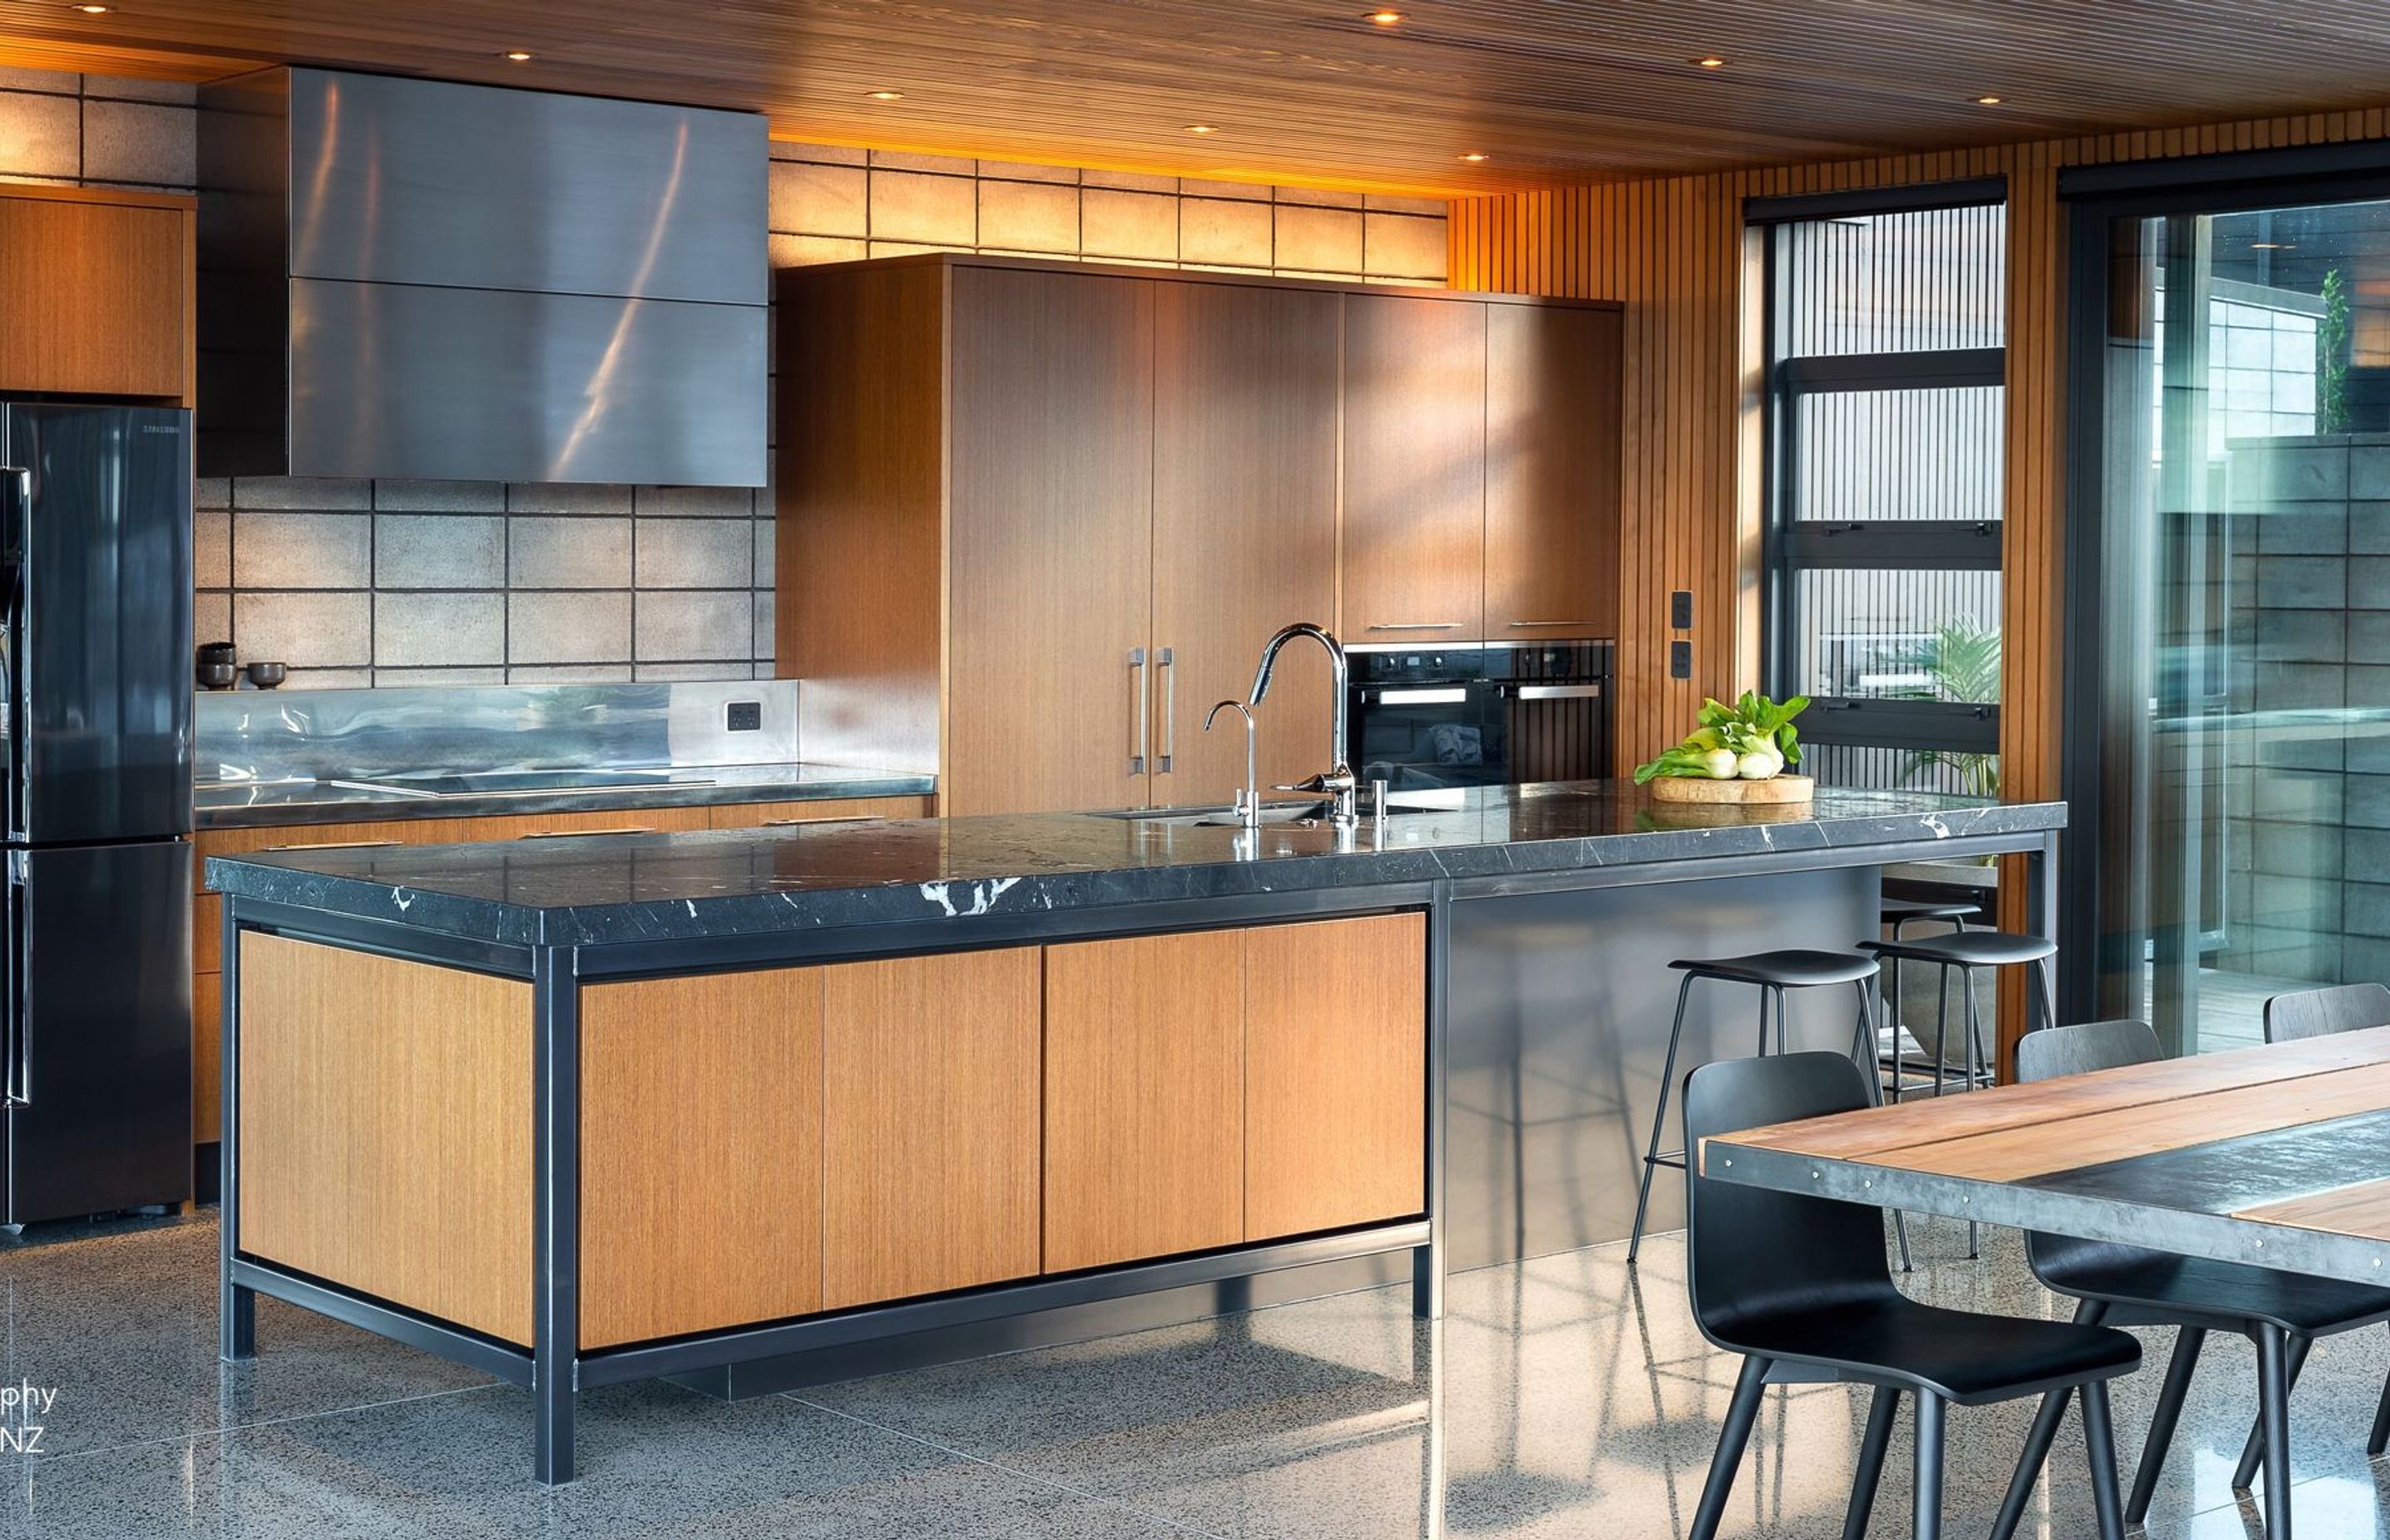 Zones have been created throughout the kitchen to keep the flow and ergonomics at its prime, while the front of the island conveniently houses drinks and homework resources.